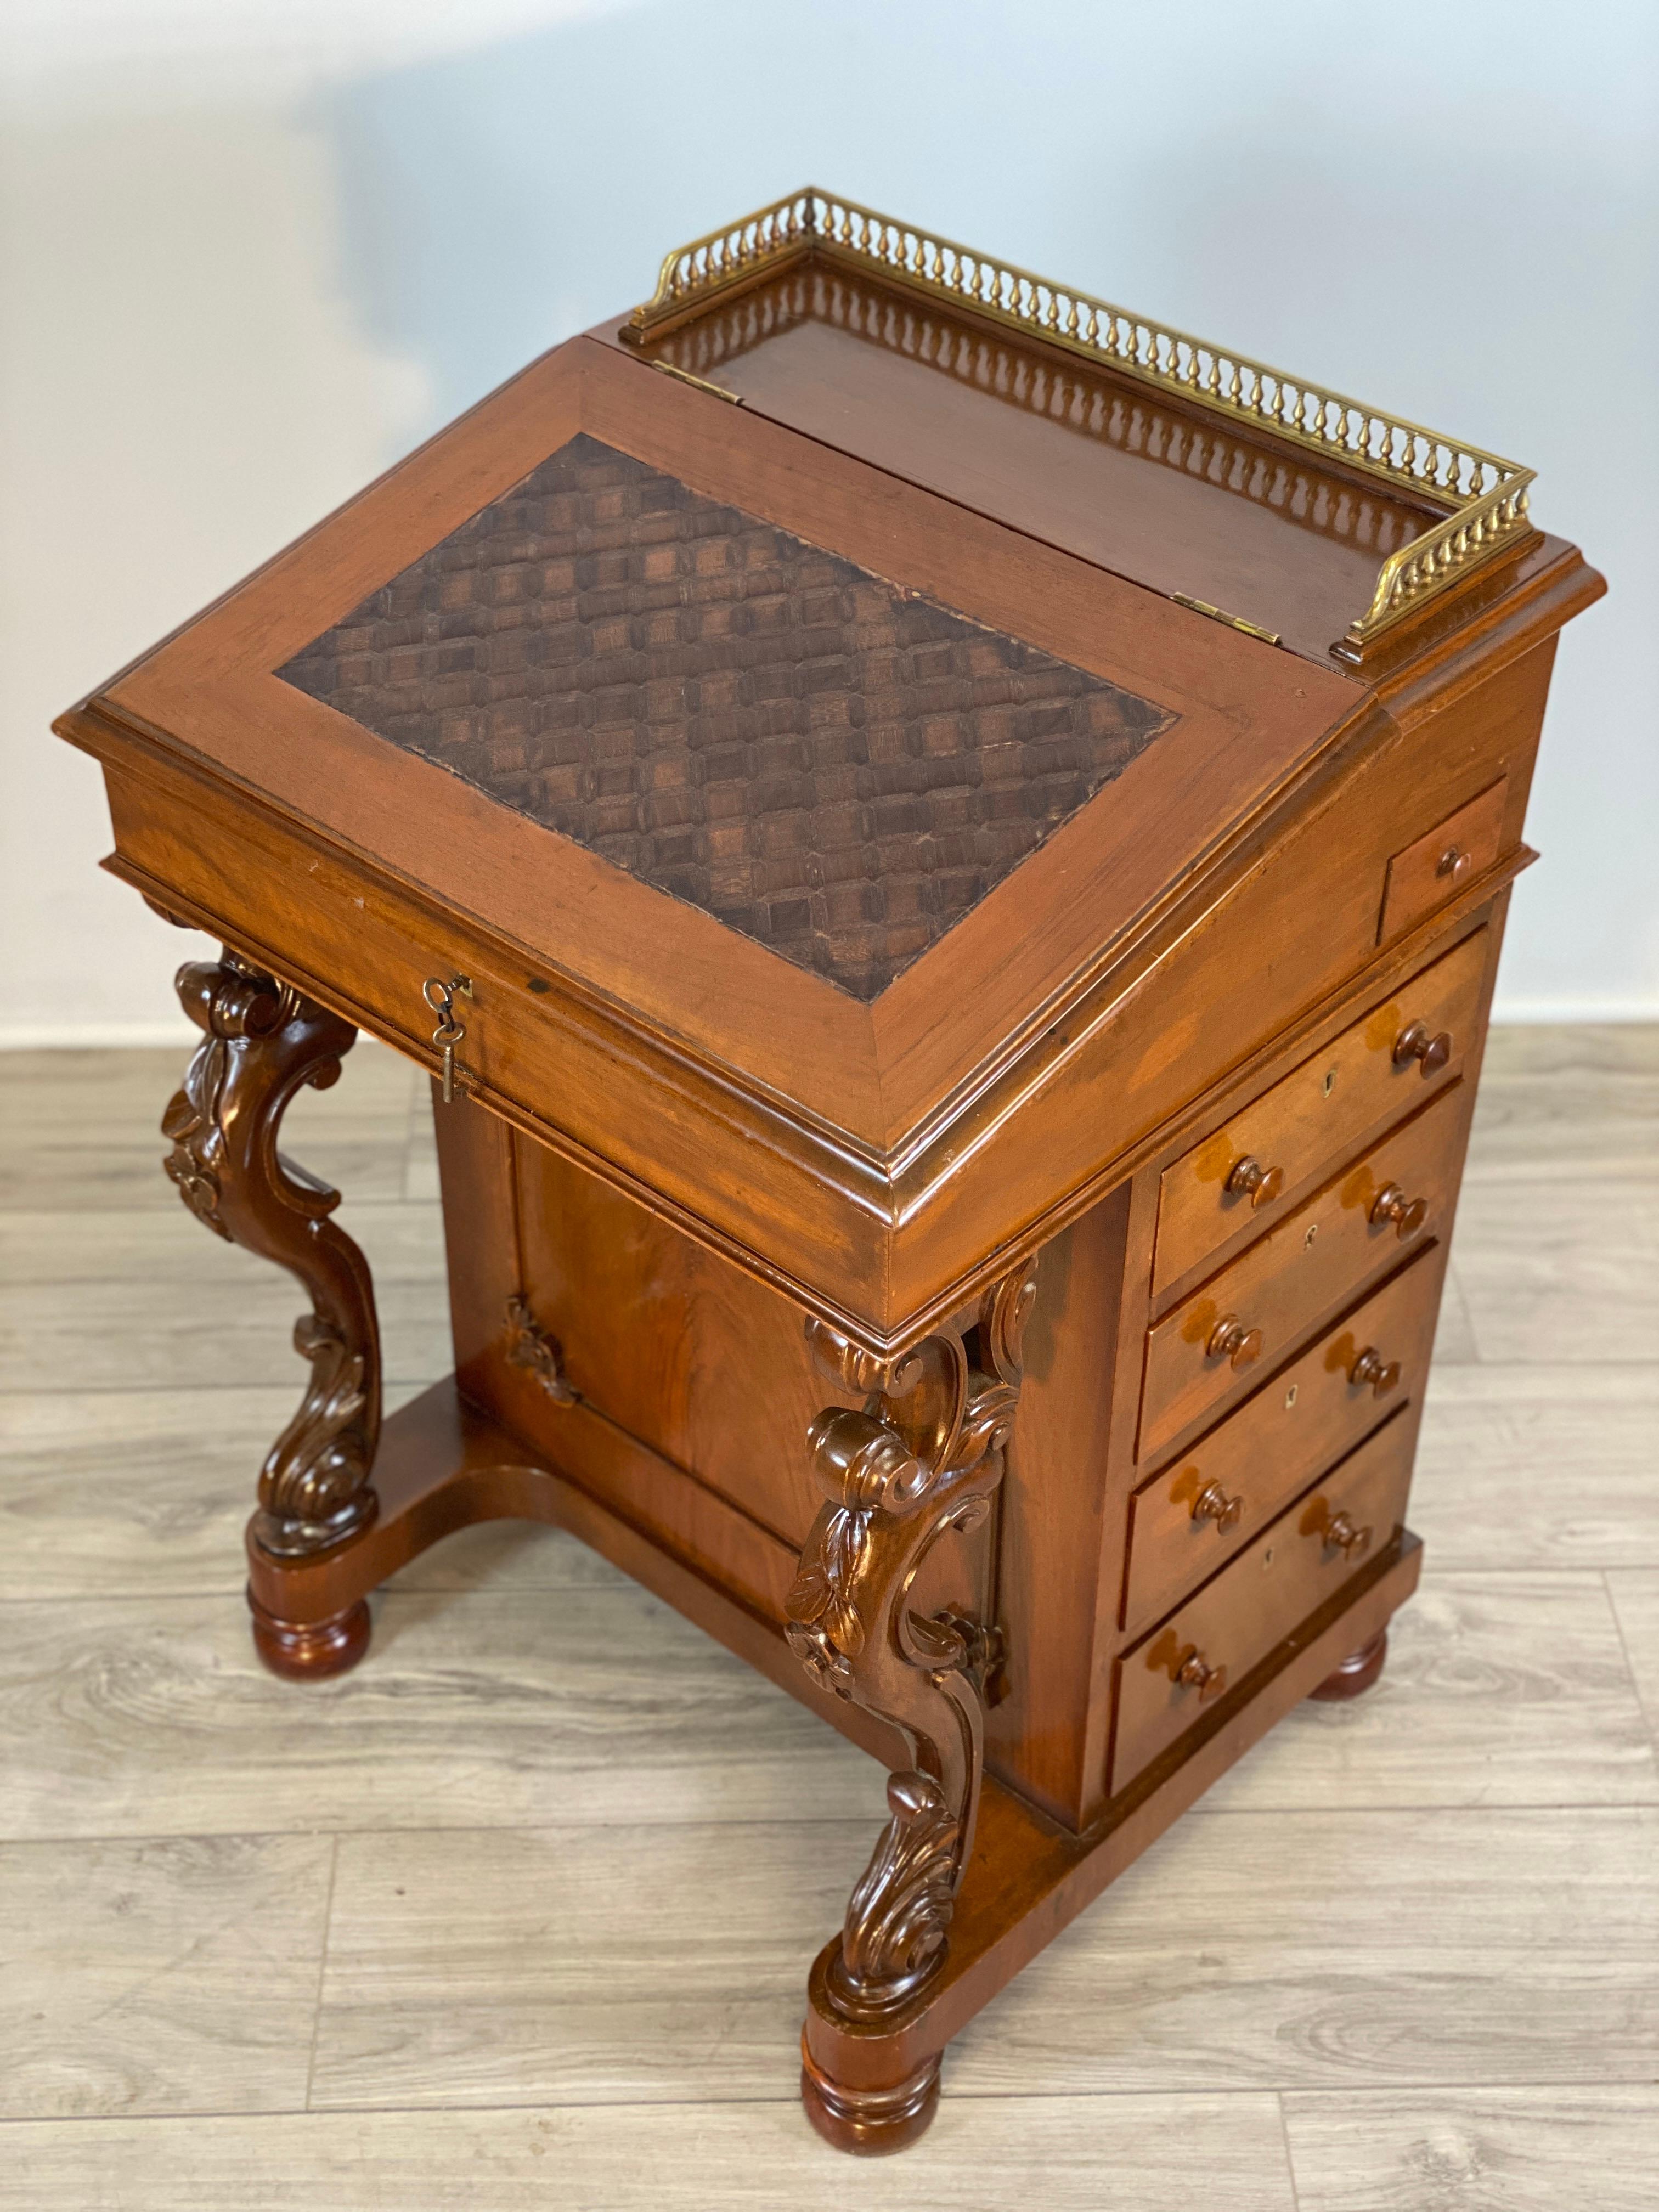 This is a well-built, hand-crafted Mahogany Davenport desk/ lecture stand. The slanted writing surface is fitted with wooden parquetry inlay pattern. The top rear is fitted with a brass gallery. The writing surface open to reveal a maple lined